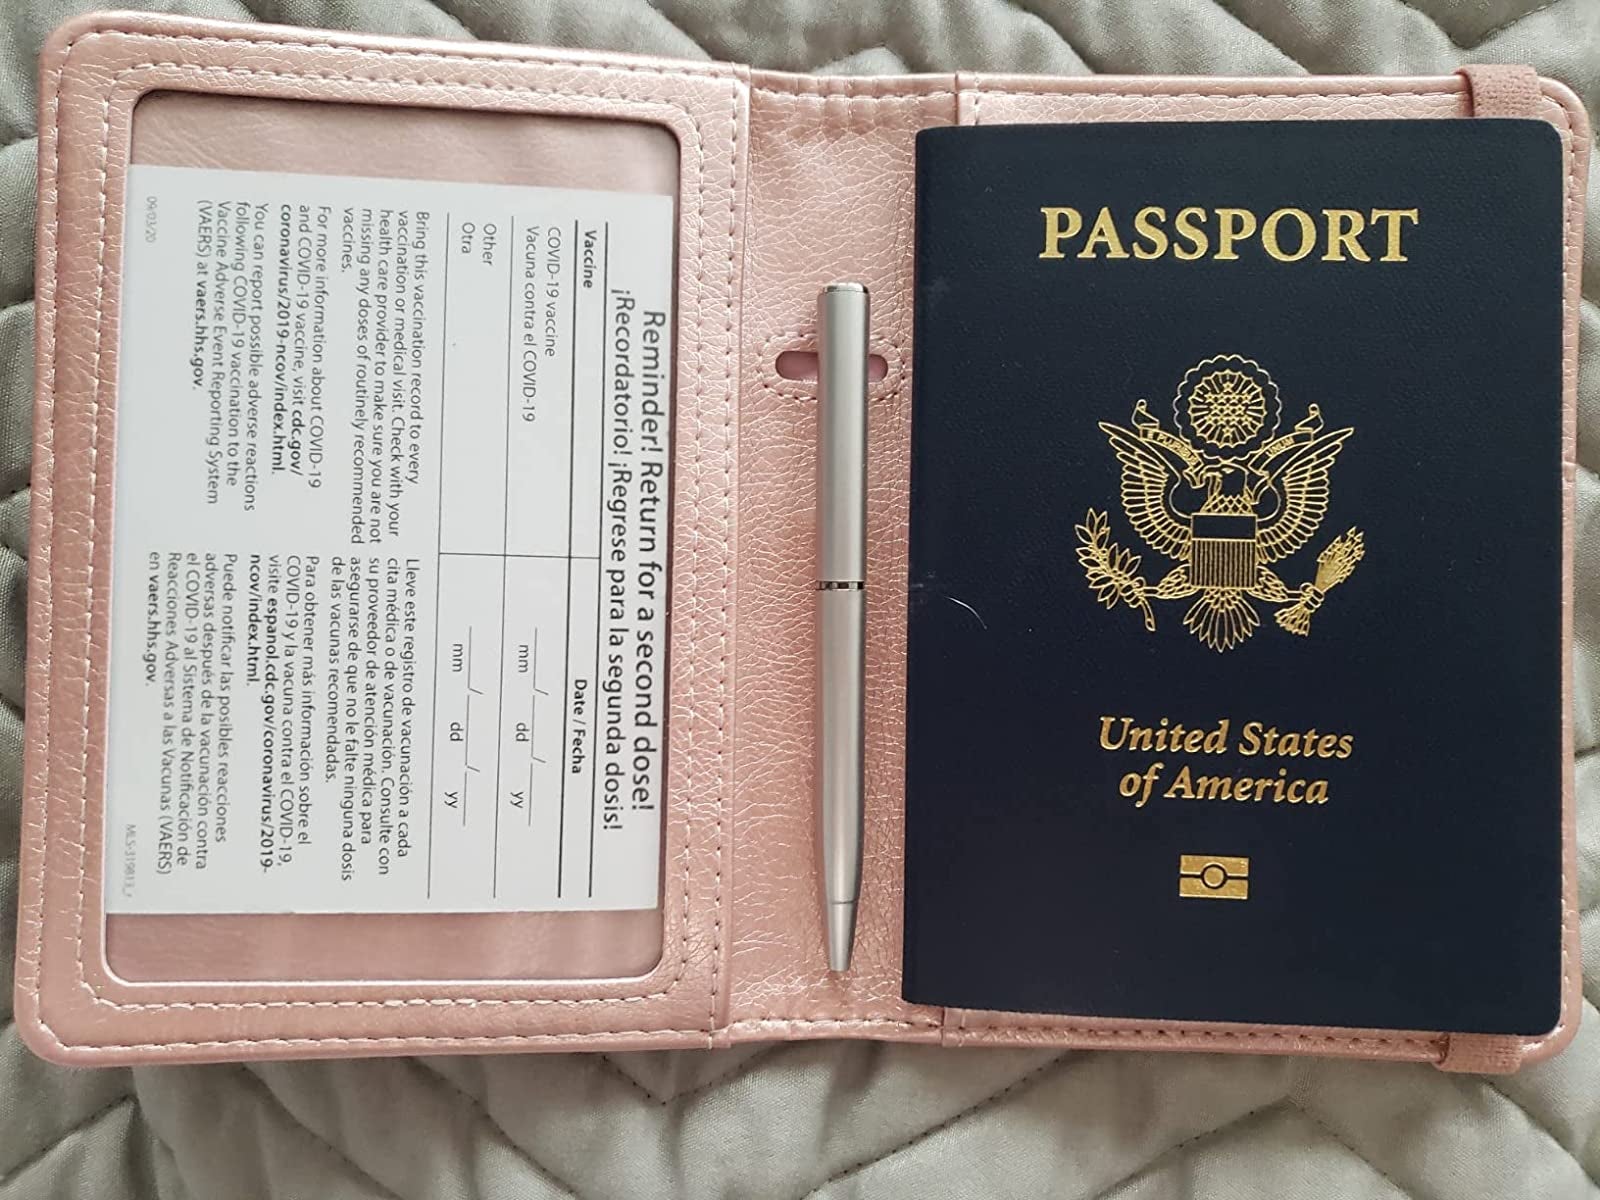 Best Passport Holder Will Protect Most Valuable Item